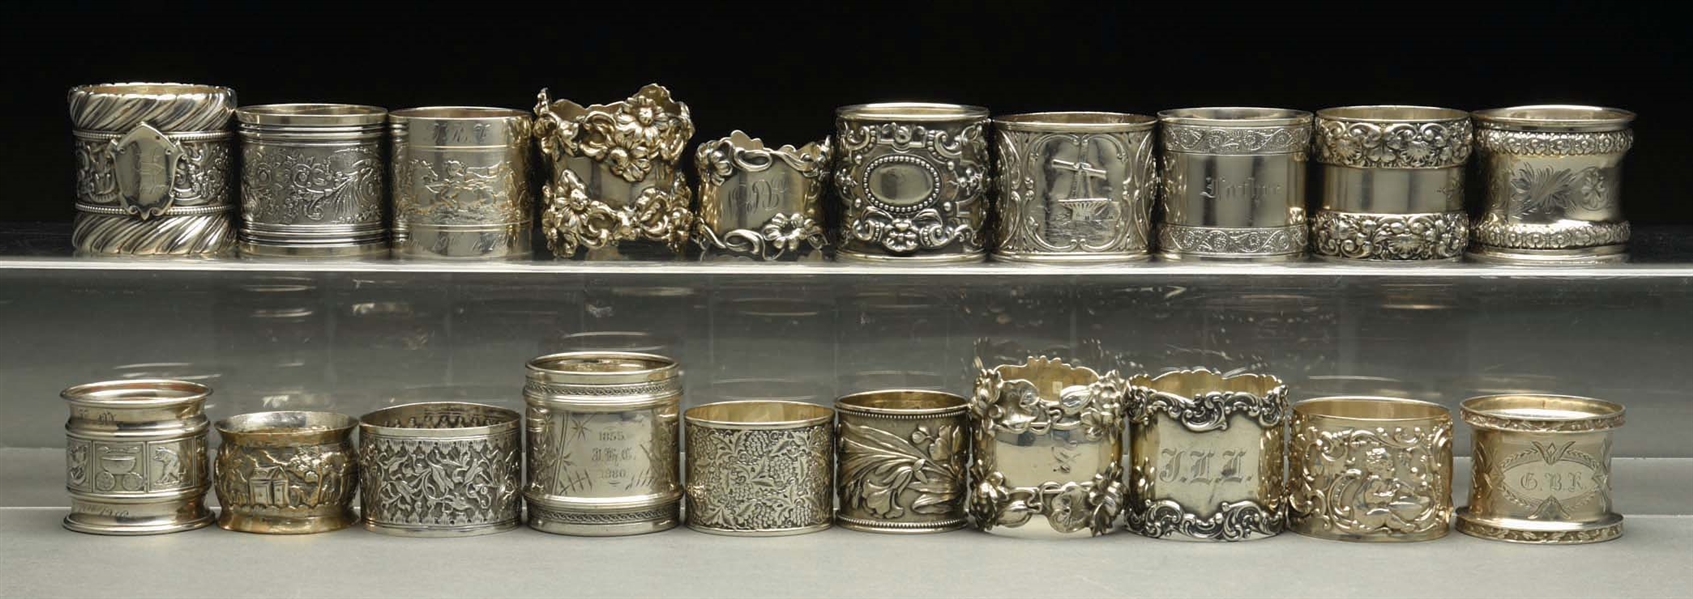 LOT OF 20: STERLING SILVER NAPKIN RINGS. 